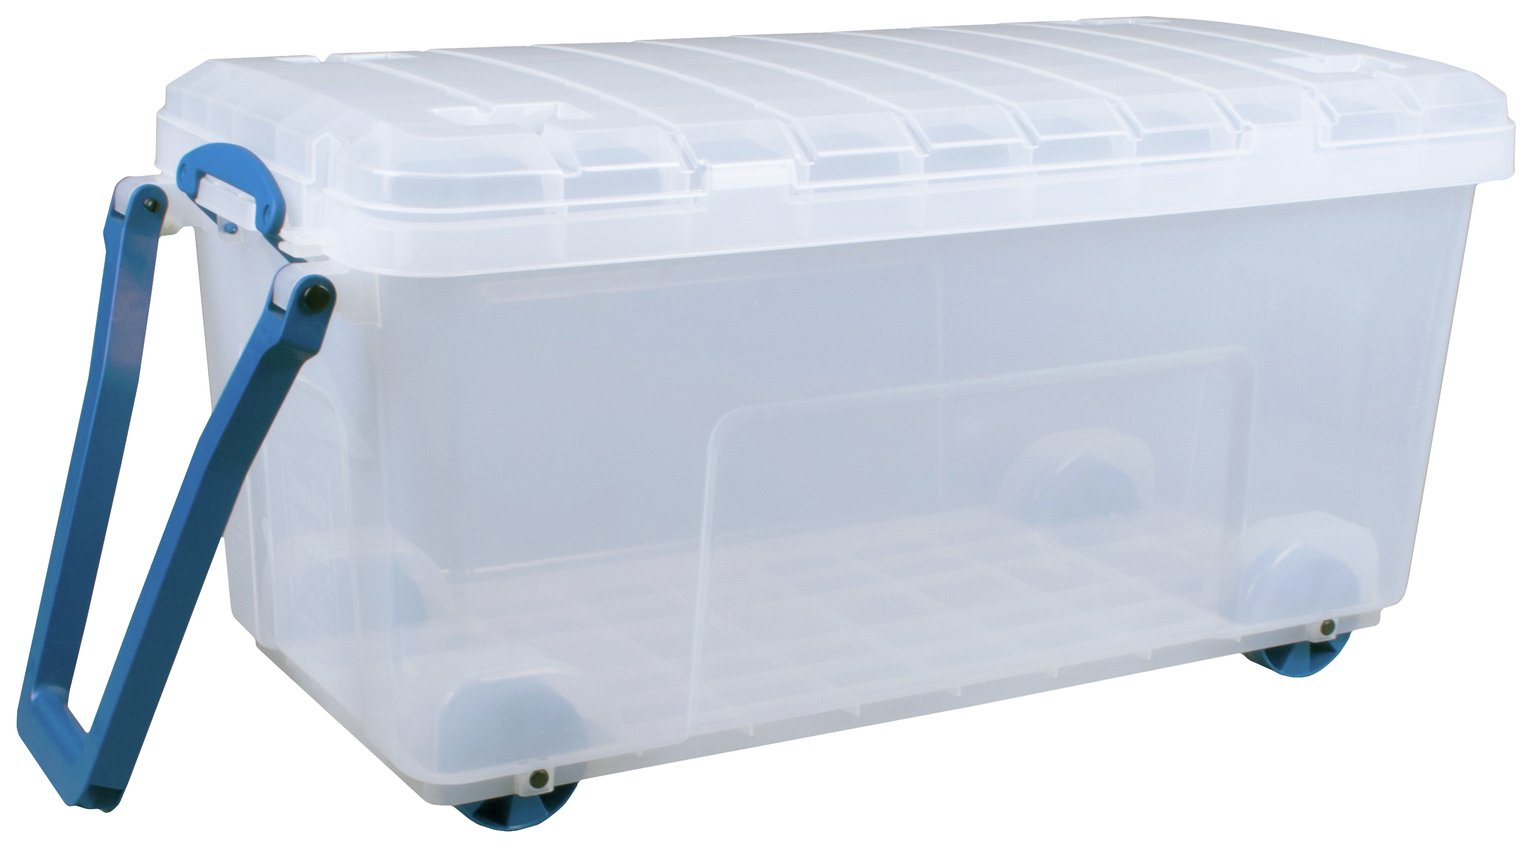 Really Useful 160L Heavy Duty Trunk with Handles - Clear